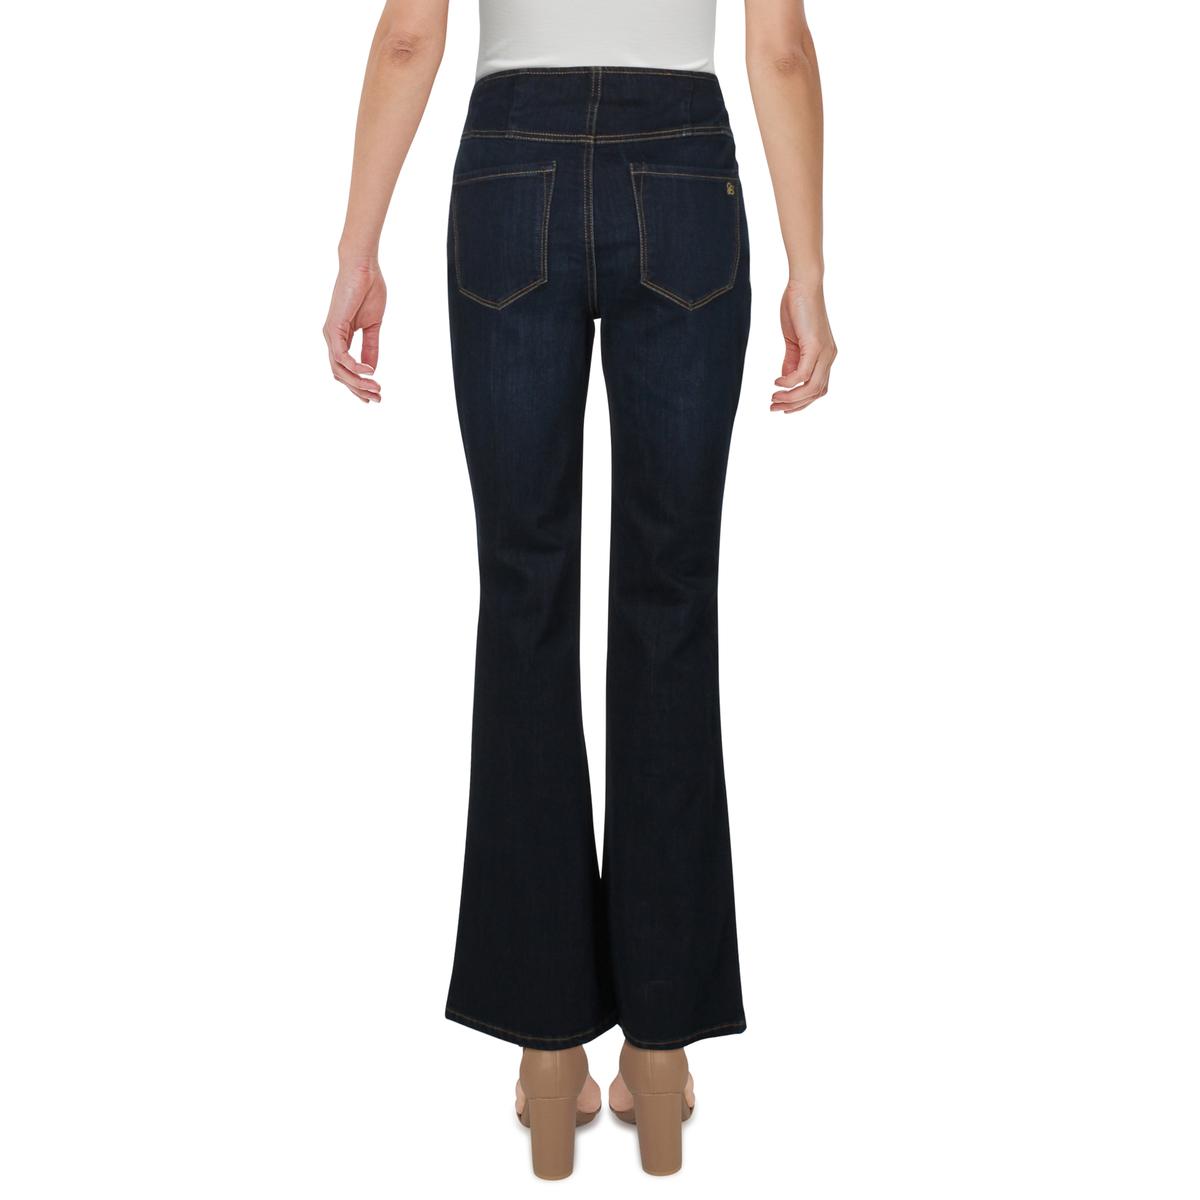 Jessica Simpson Women's High Rise Pull On Contour Flare Jeans | eBay